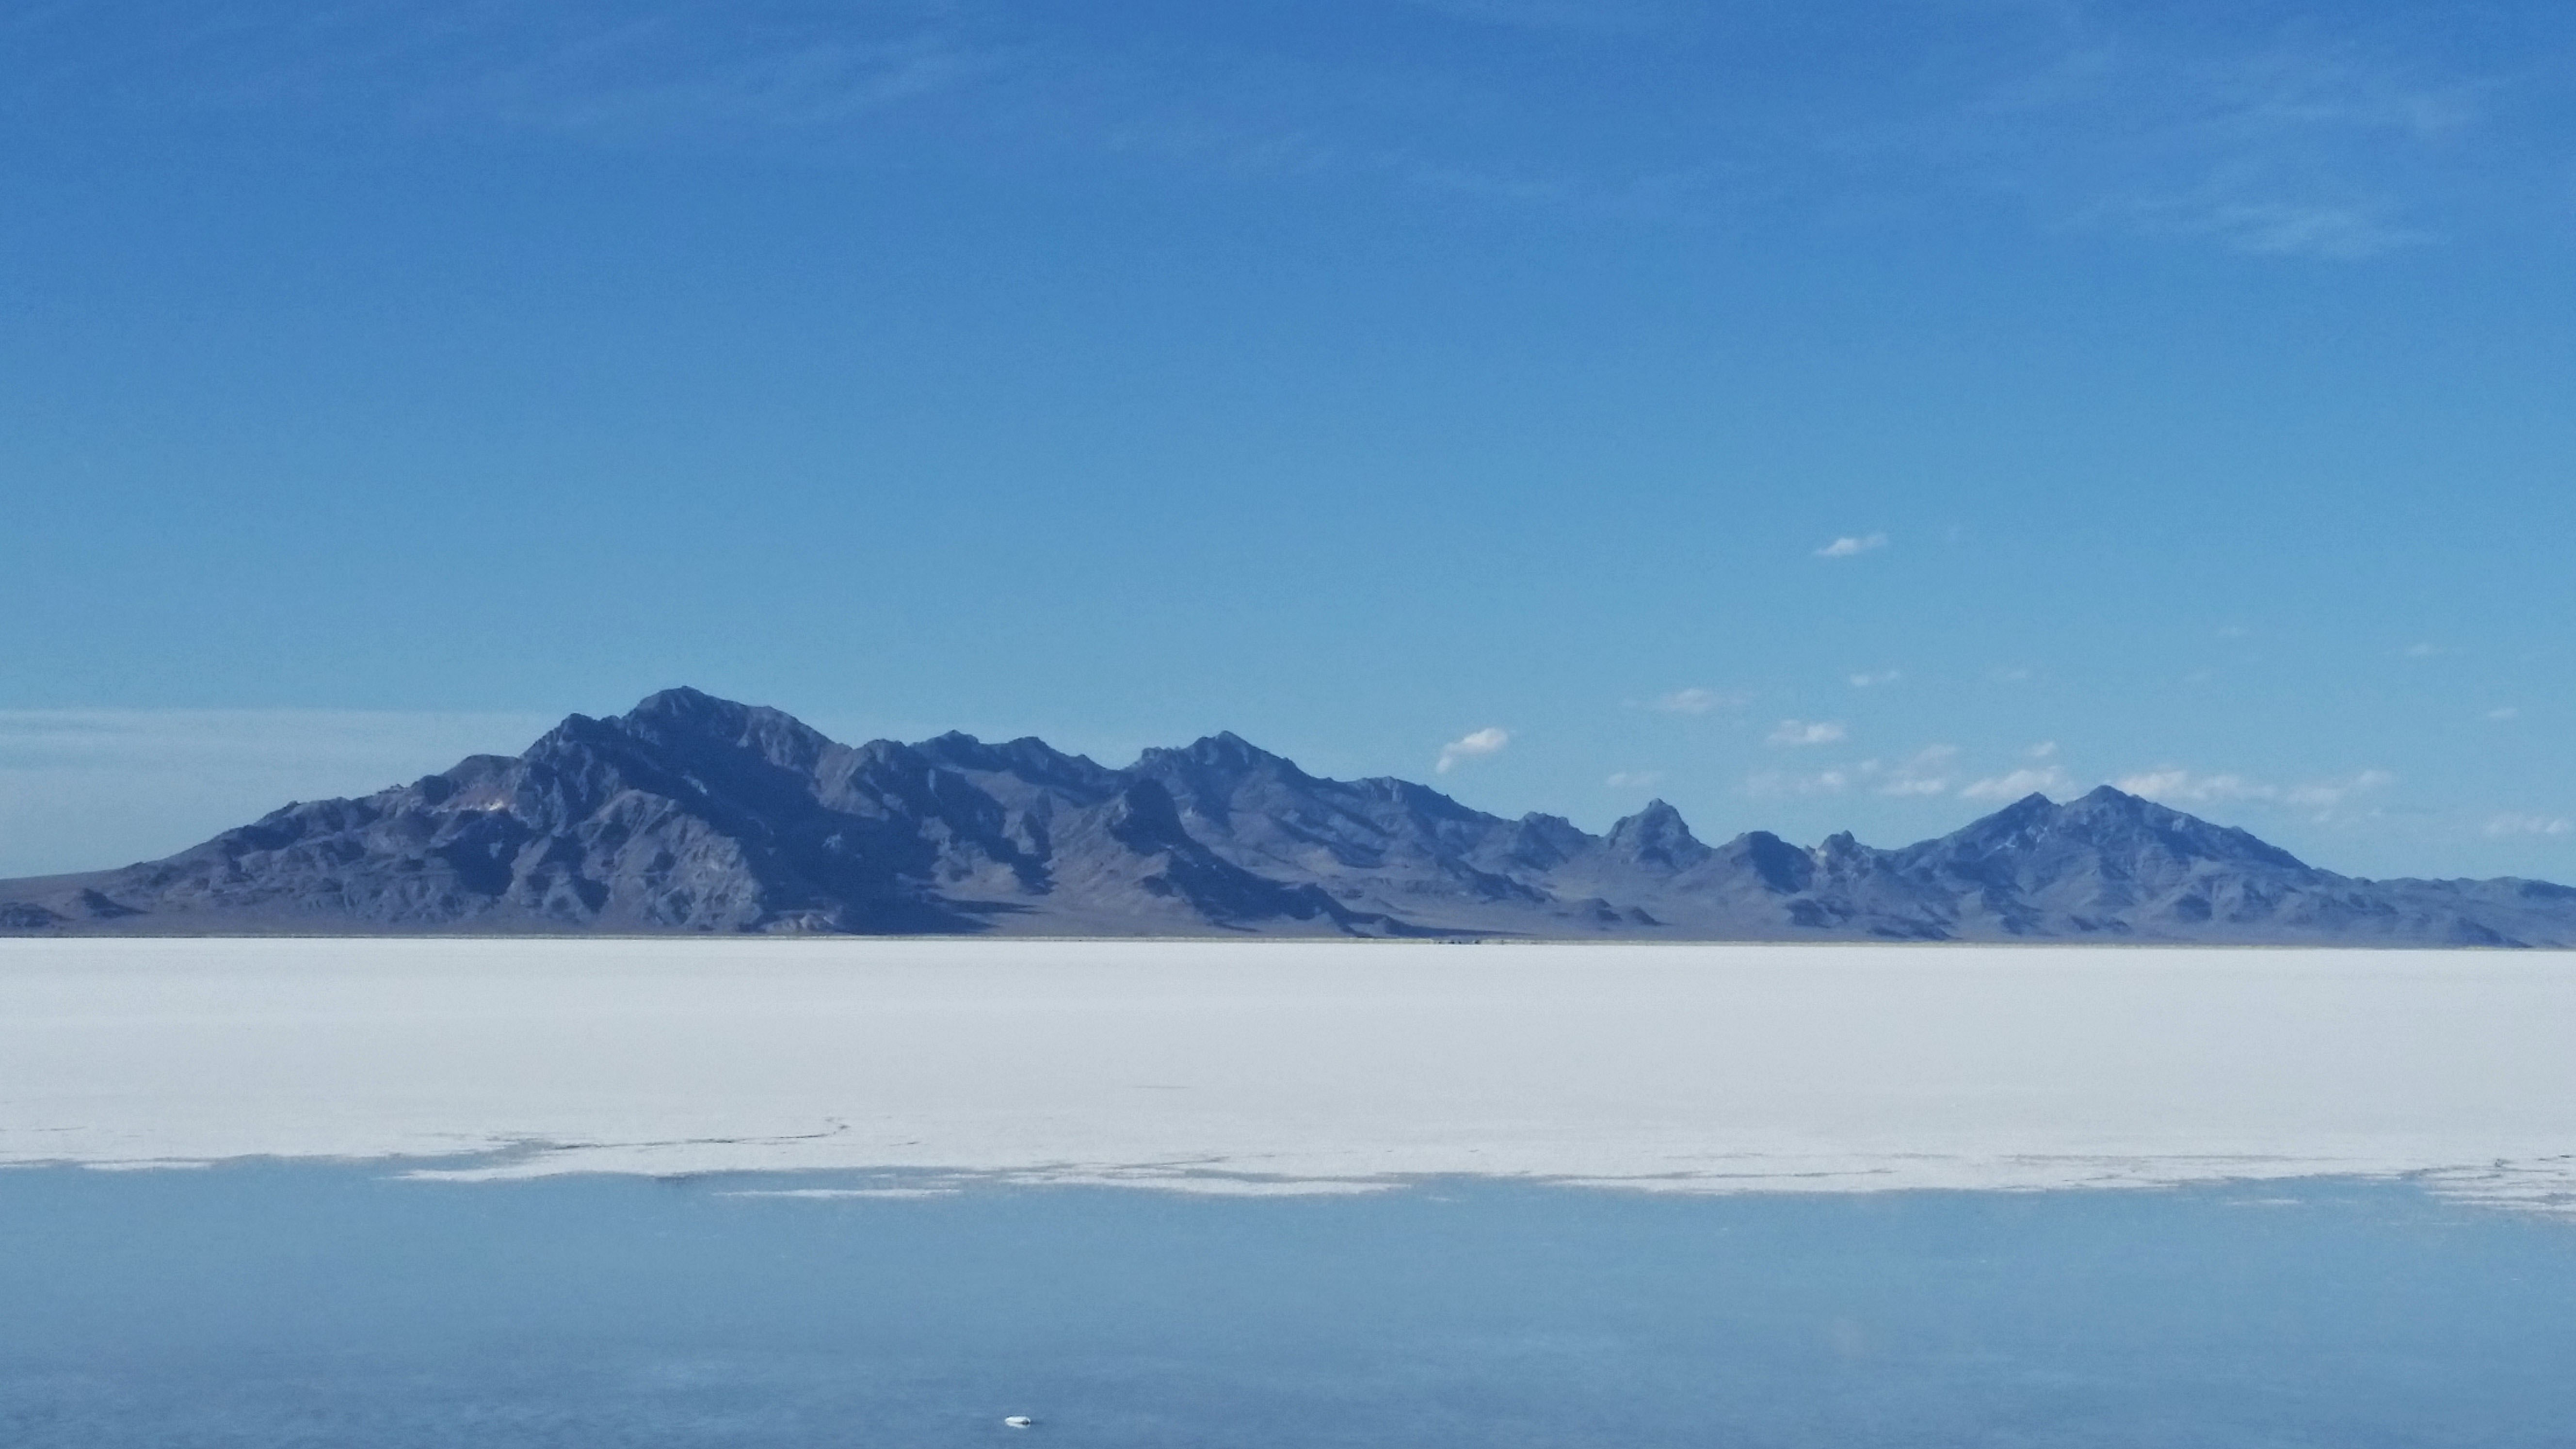 pictures of the salt flats in utah